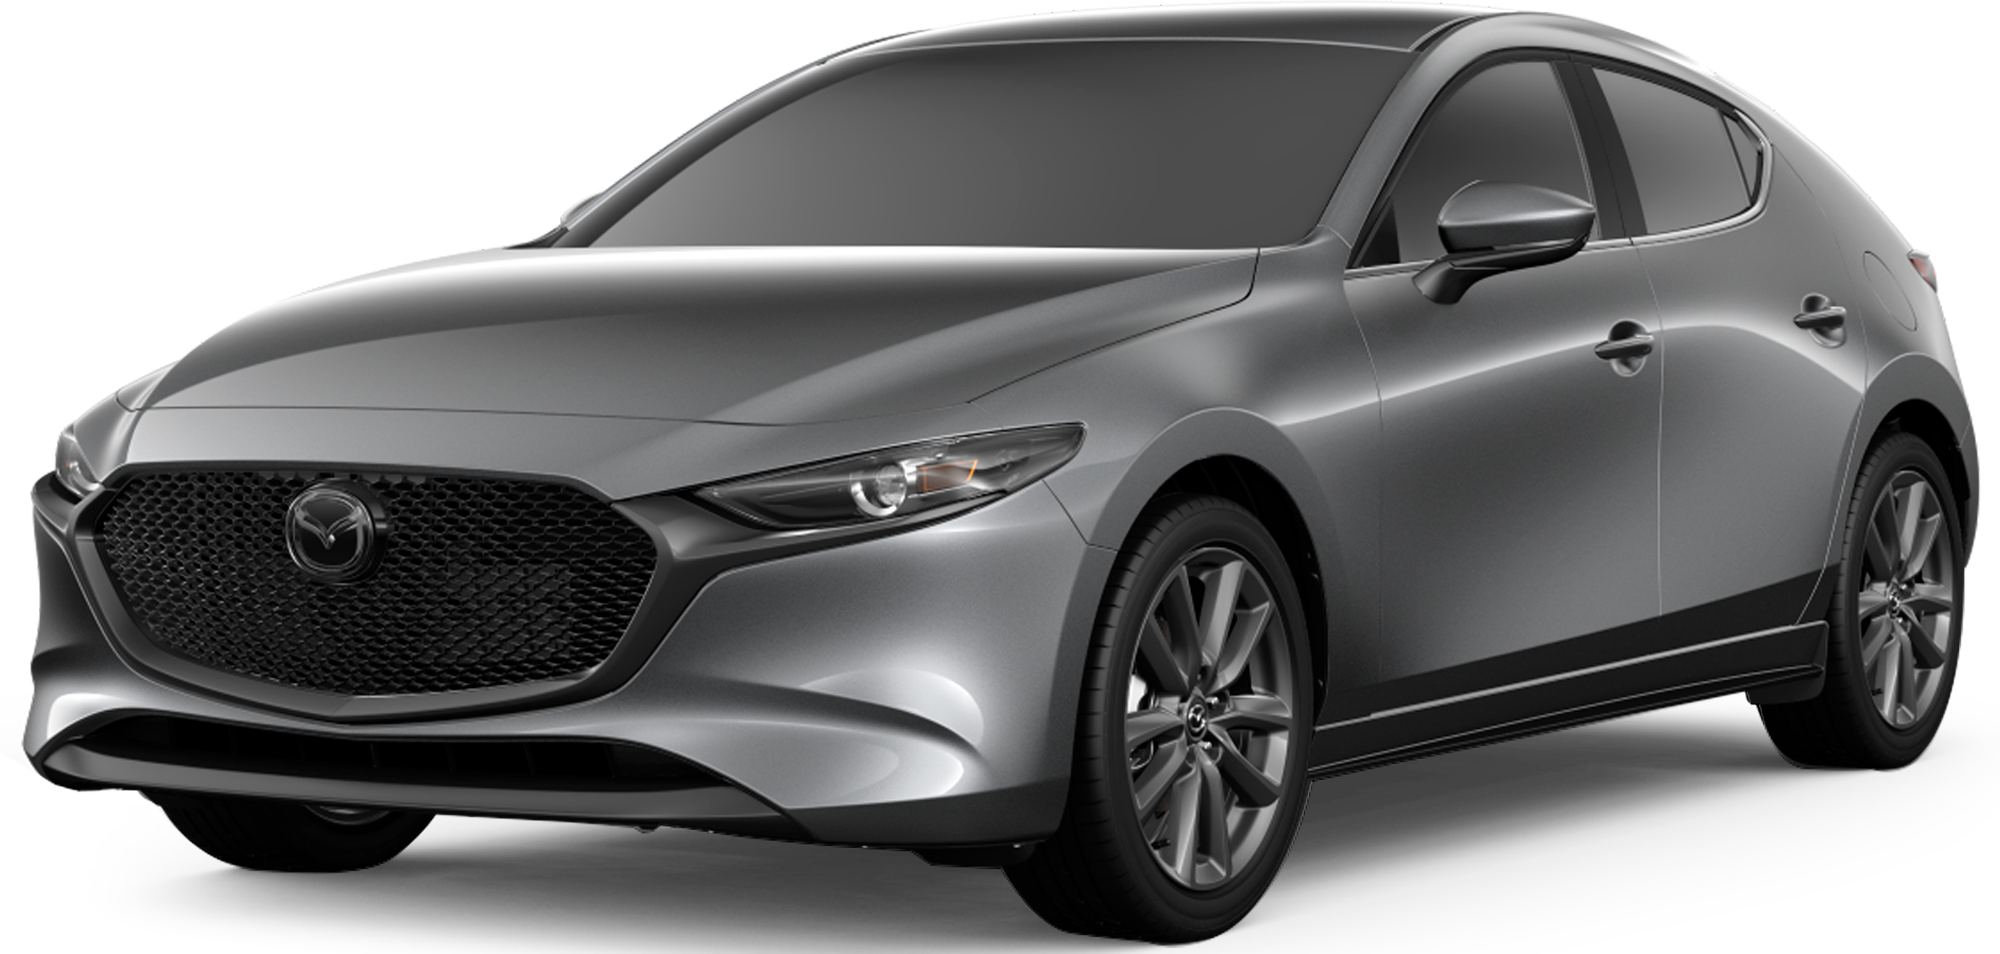 2019-mazda-mazda3-incentives-specials-offers-in-florence-ky